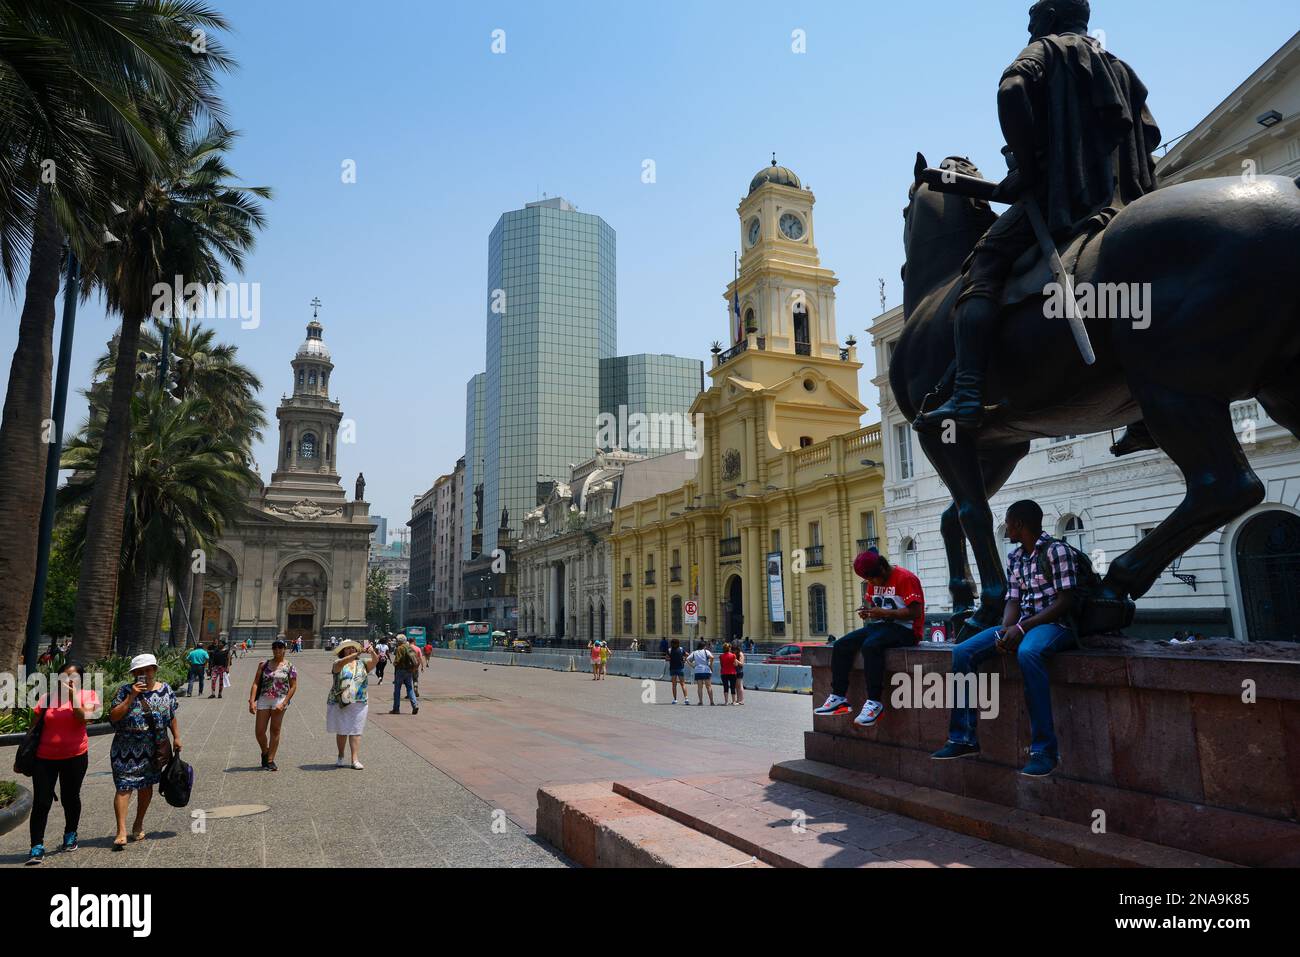 Plaza de Armas with a contrast of old and new architecture in Santiago, Chile; Santiago de Chile, Chile Stock Photo